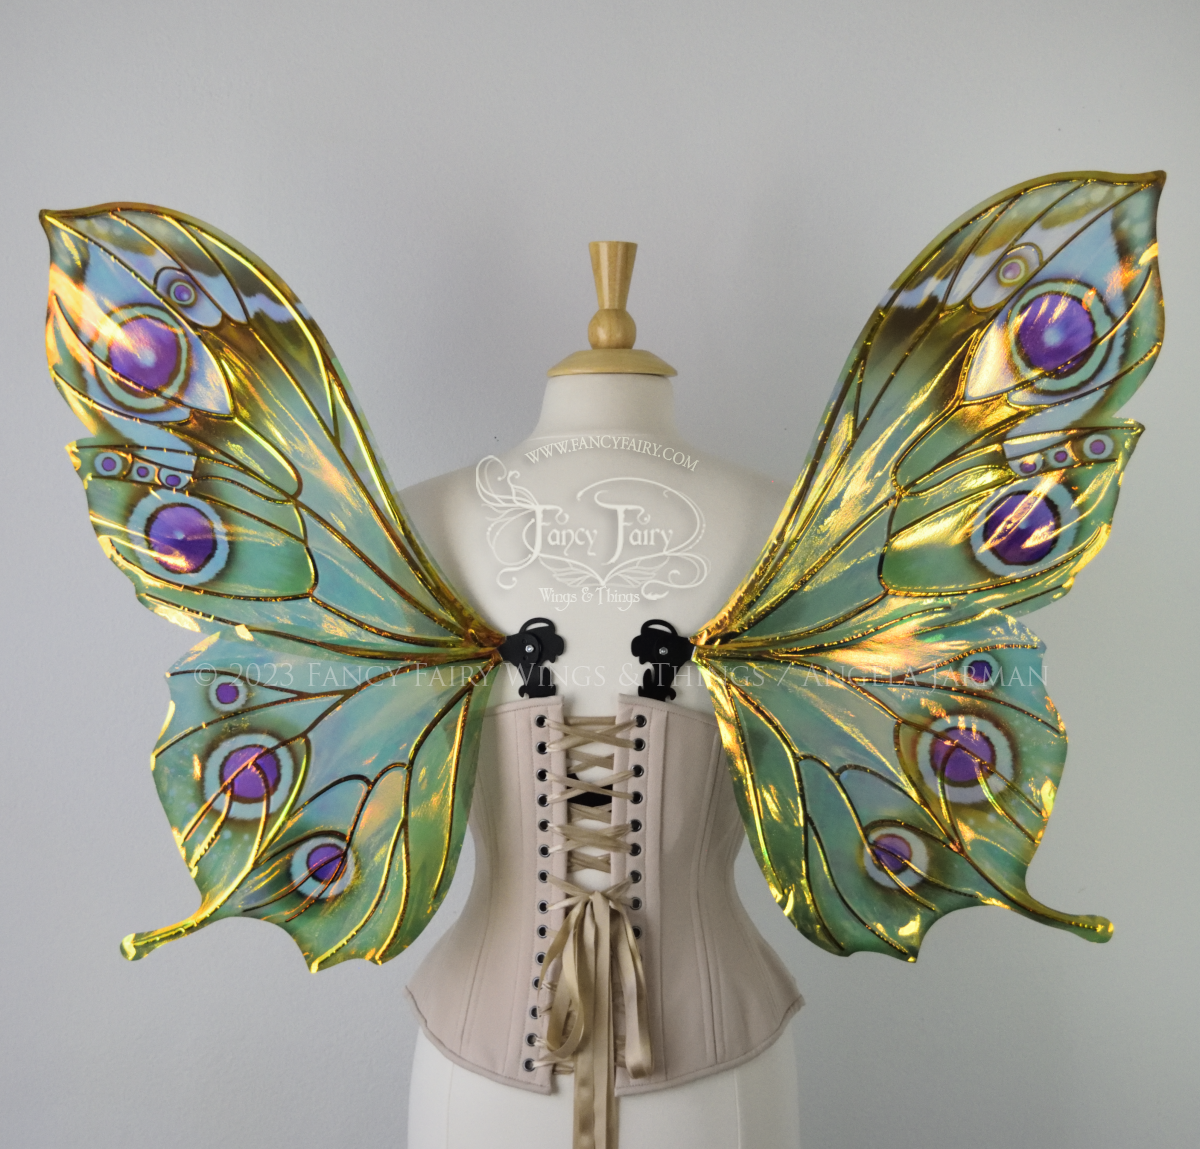 Back view of iridescent green, black and fuchsia costume fairy wings, worn on a dressform